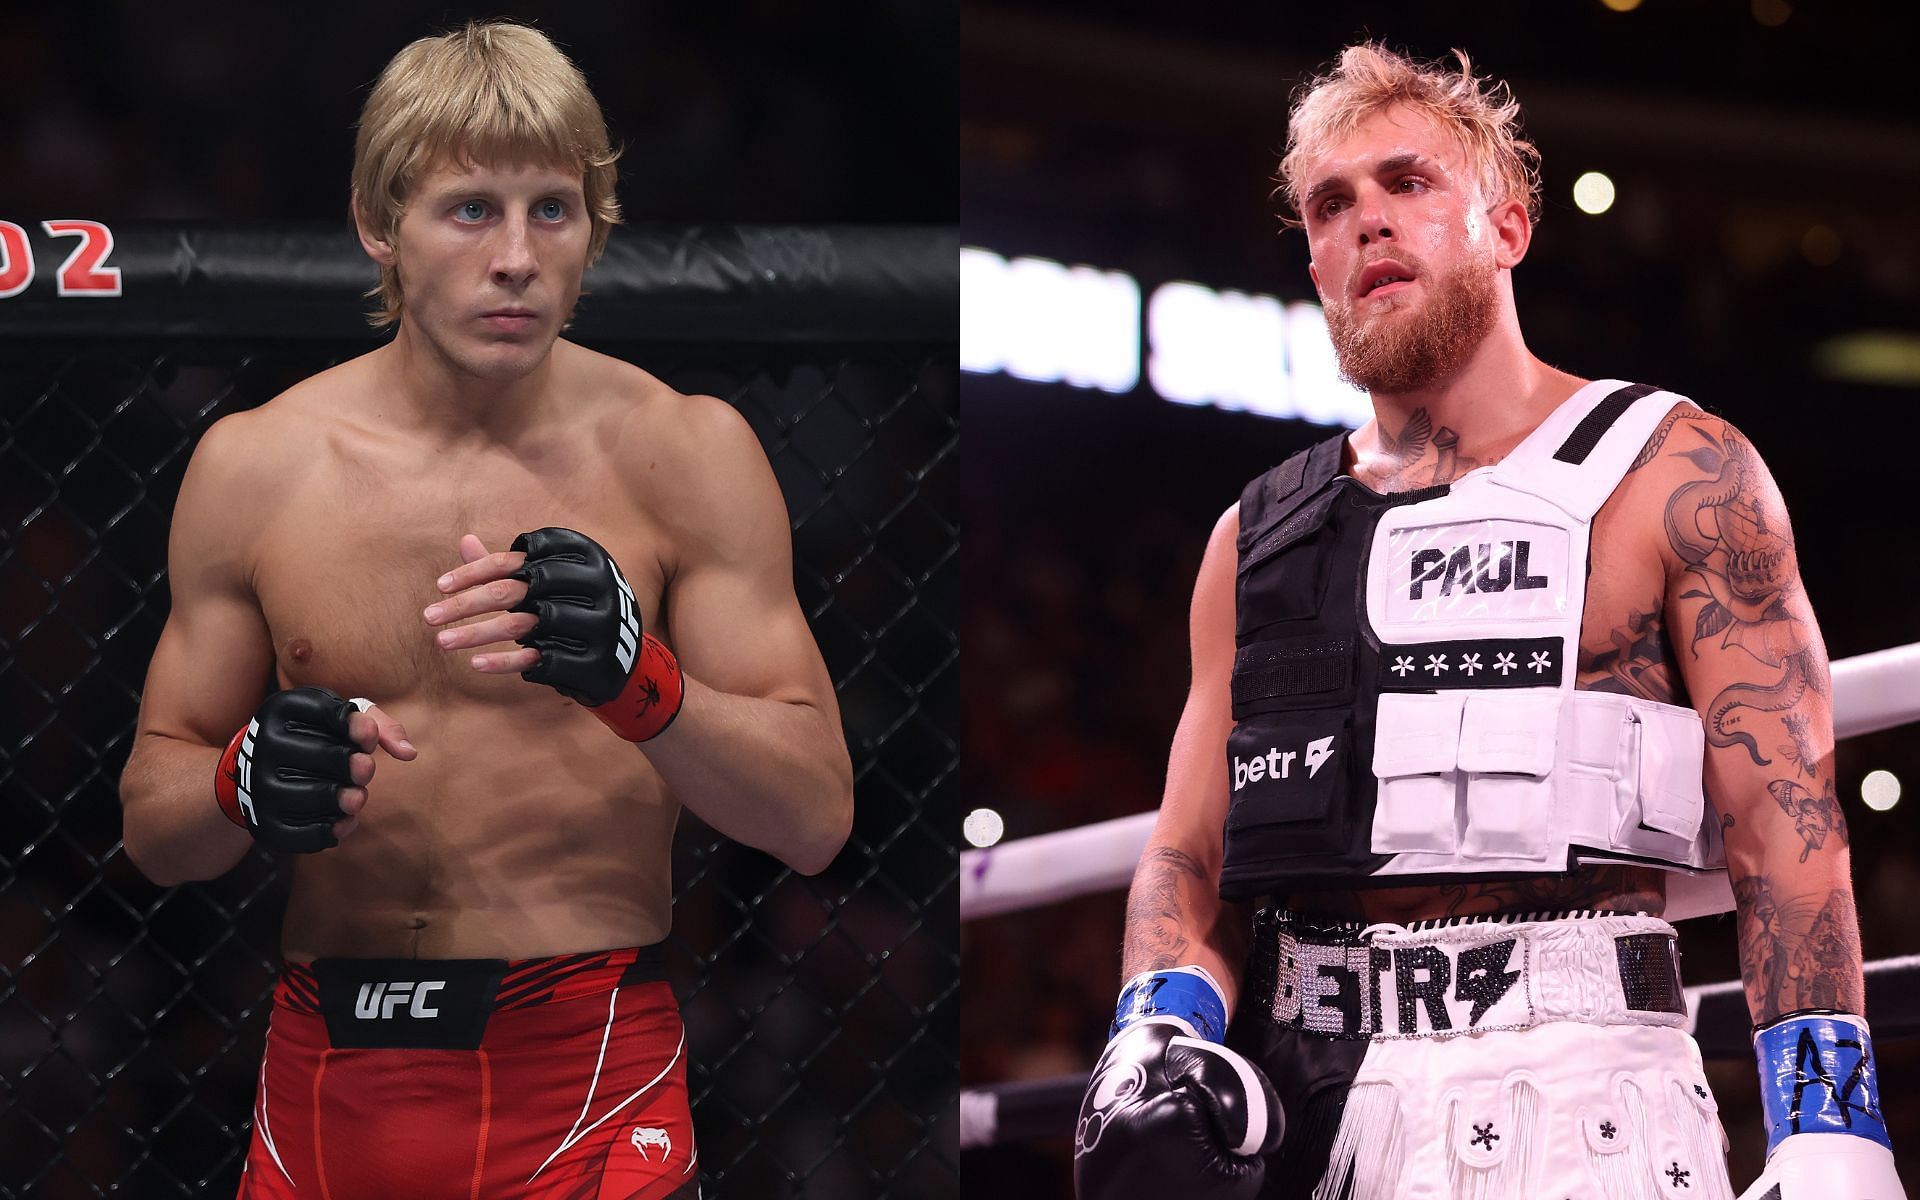 Paddy Pimblett (left) and Jake Paul (right). [via Getty Images]